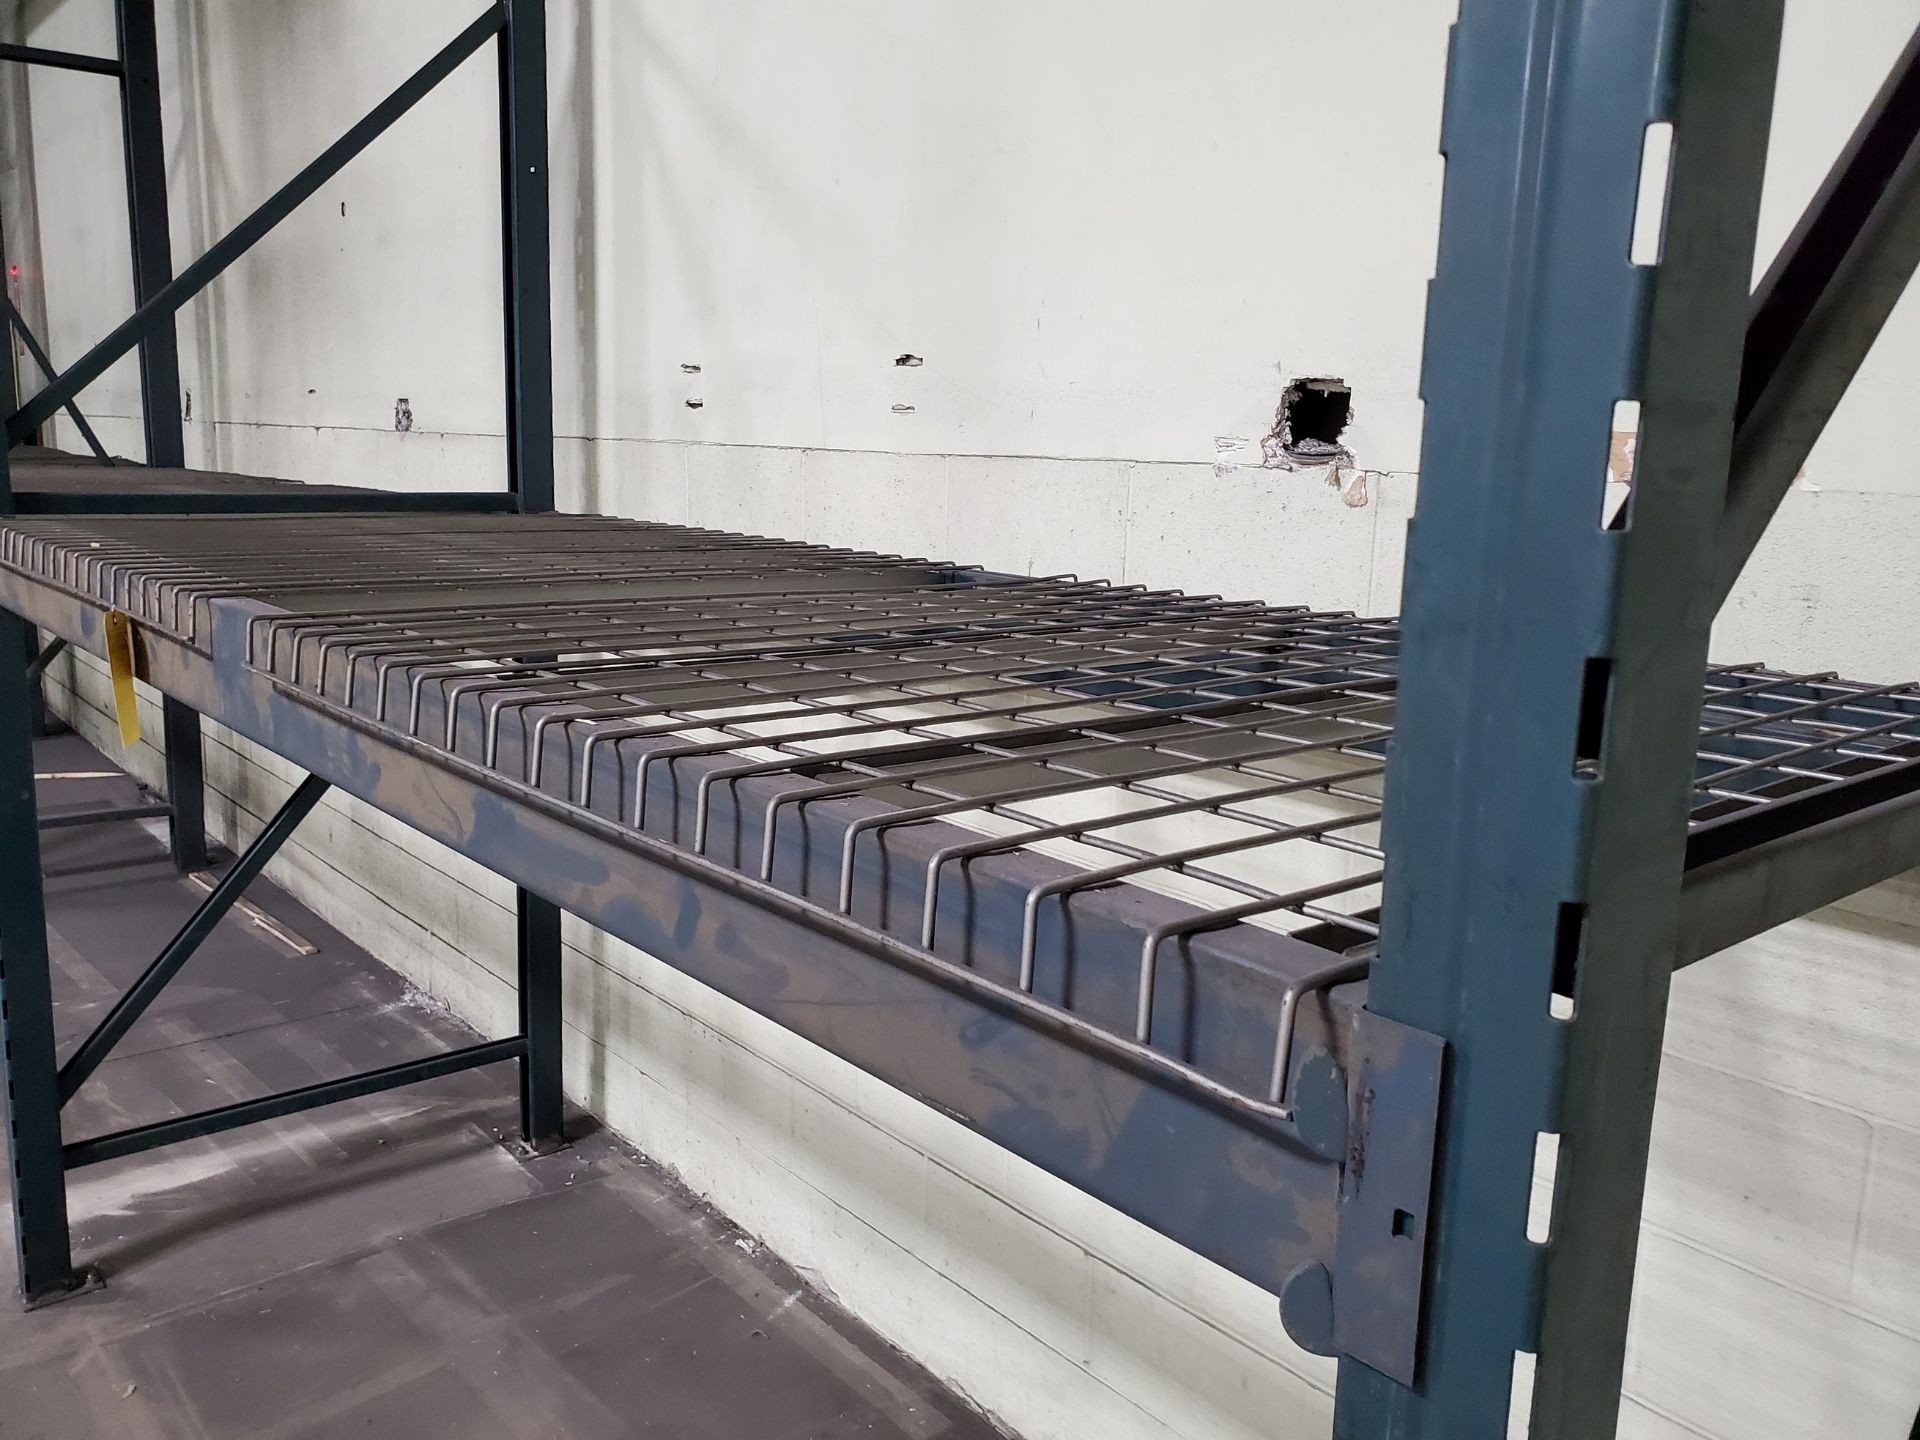 (5) SECTIONS OF SLOT/CORNER LOCK PALLET RACKING - VARIOUS SIZE HEIGHTS (8'-16') AND BEAMS (9'-12') - - Image 7 of 7